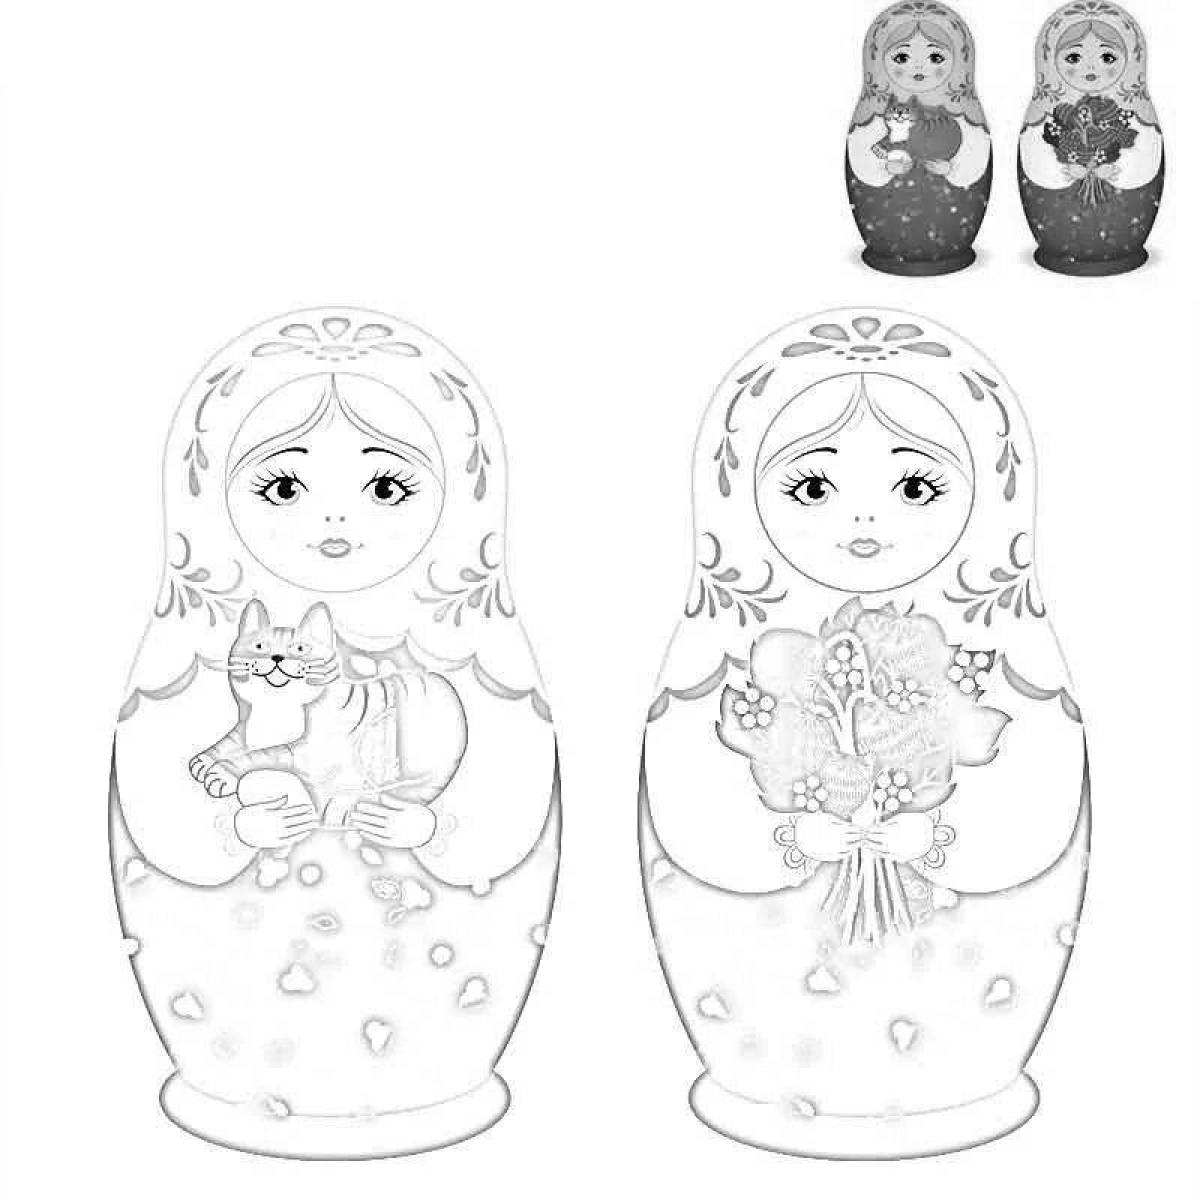 Charming matryoshka picture for kids